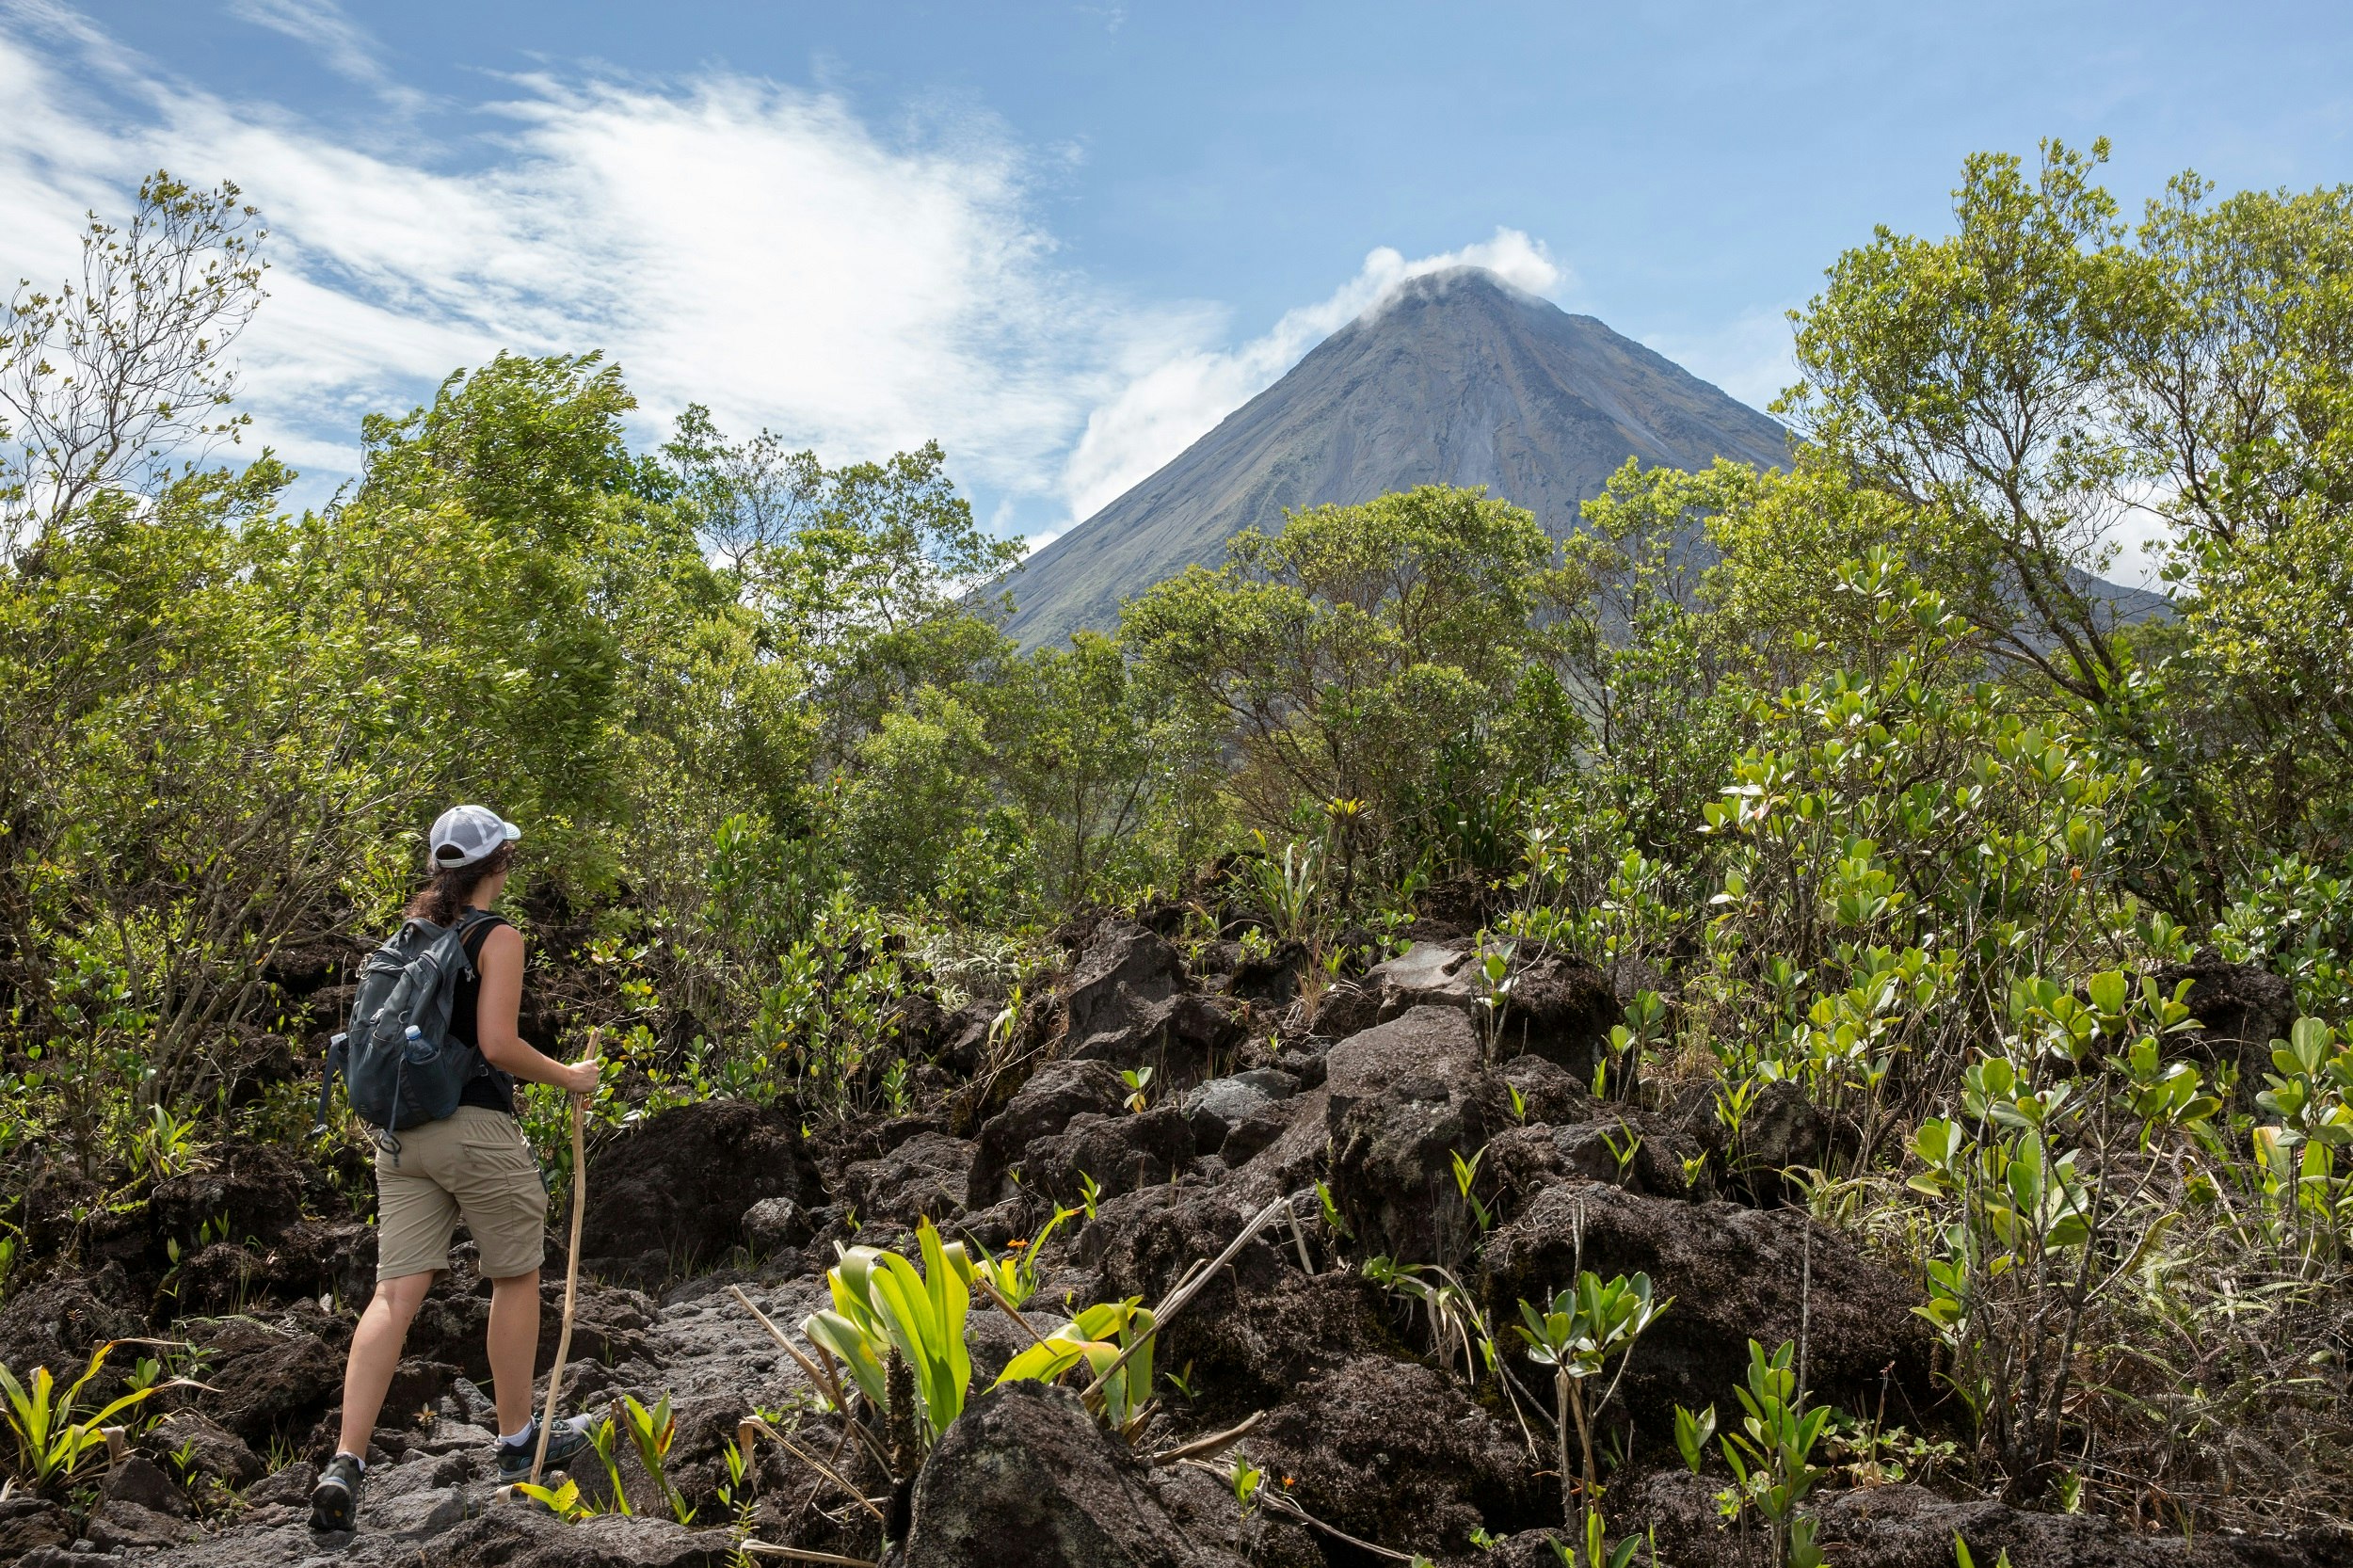 A hiker, supporting herself with two sticks, strides up a path towards a distant volcano